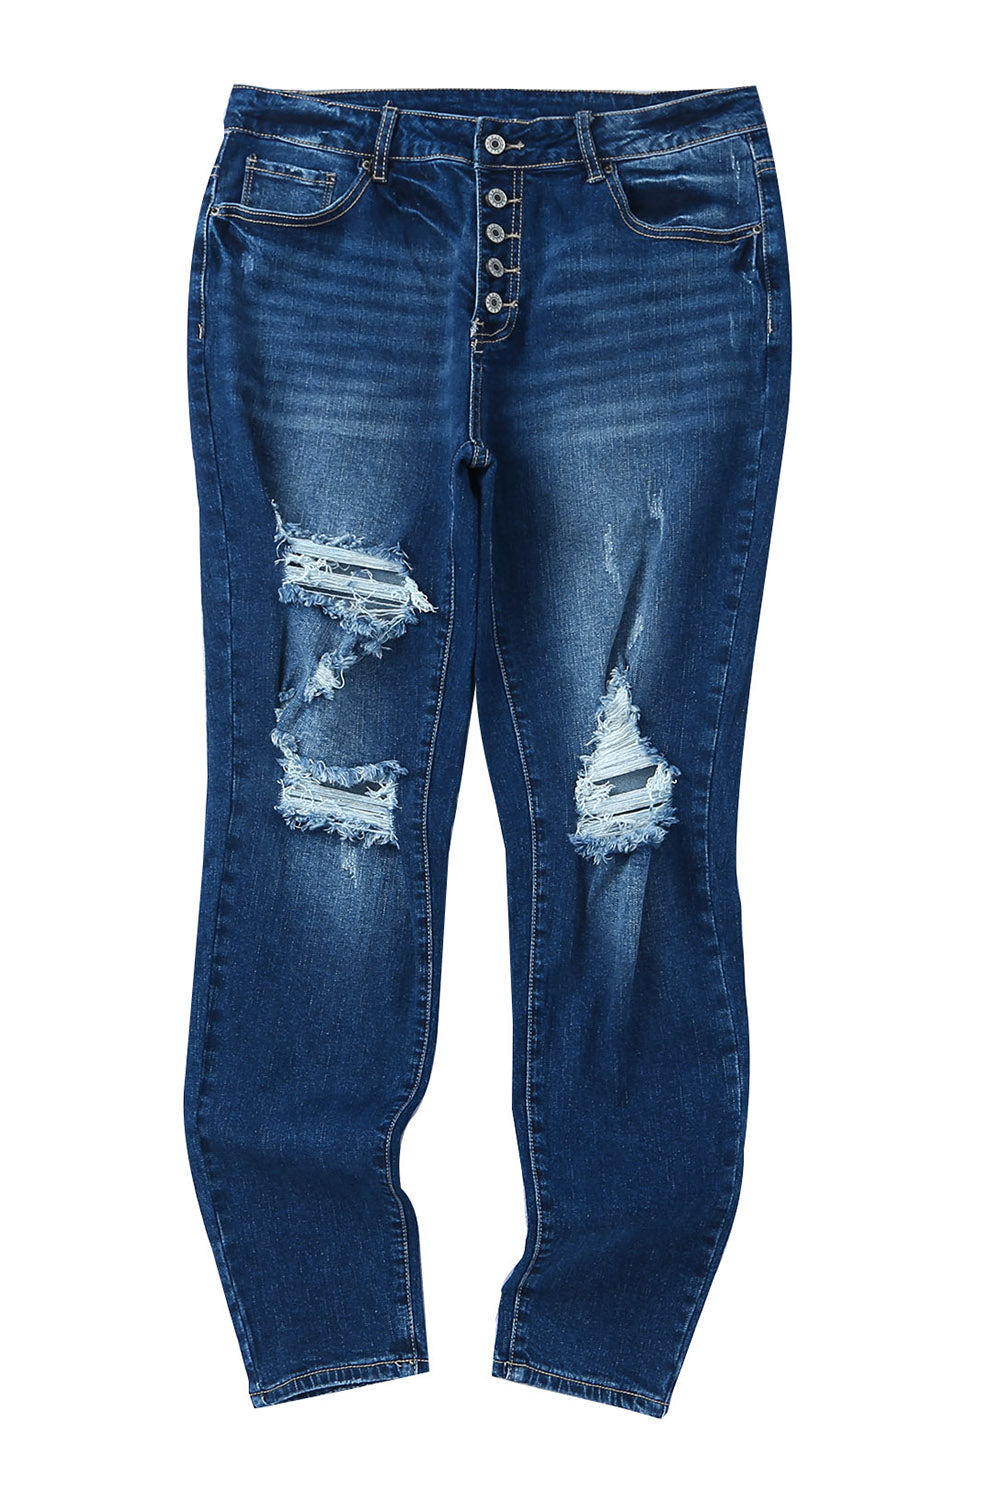 Blue Medium Wash Button Fly Distressed Plus Size Jeans